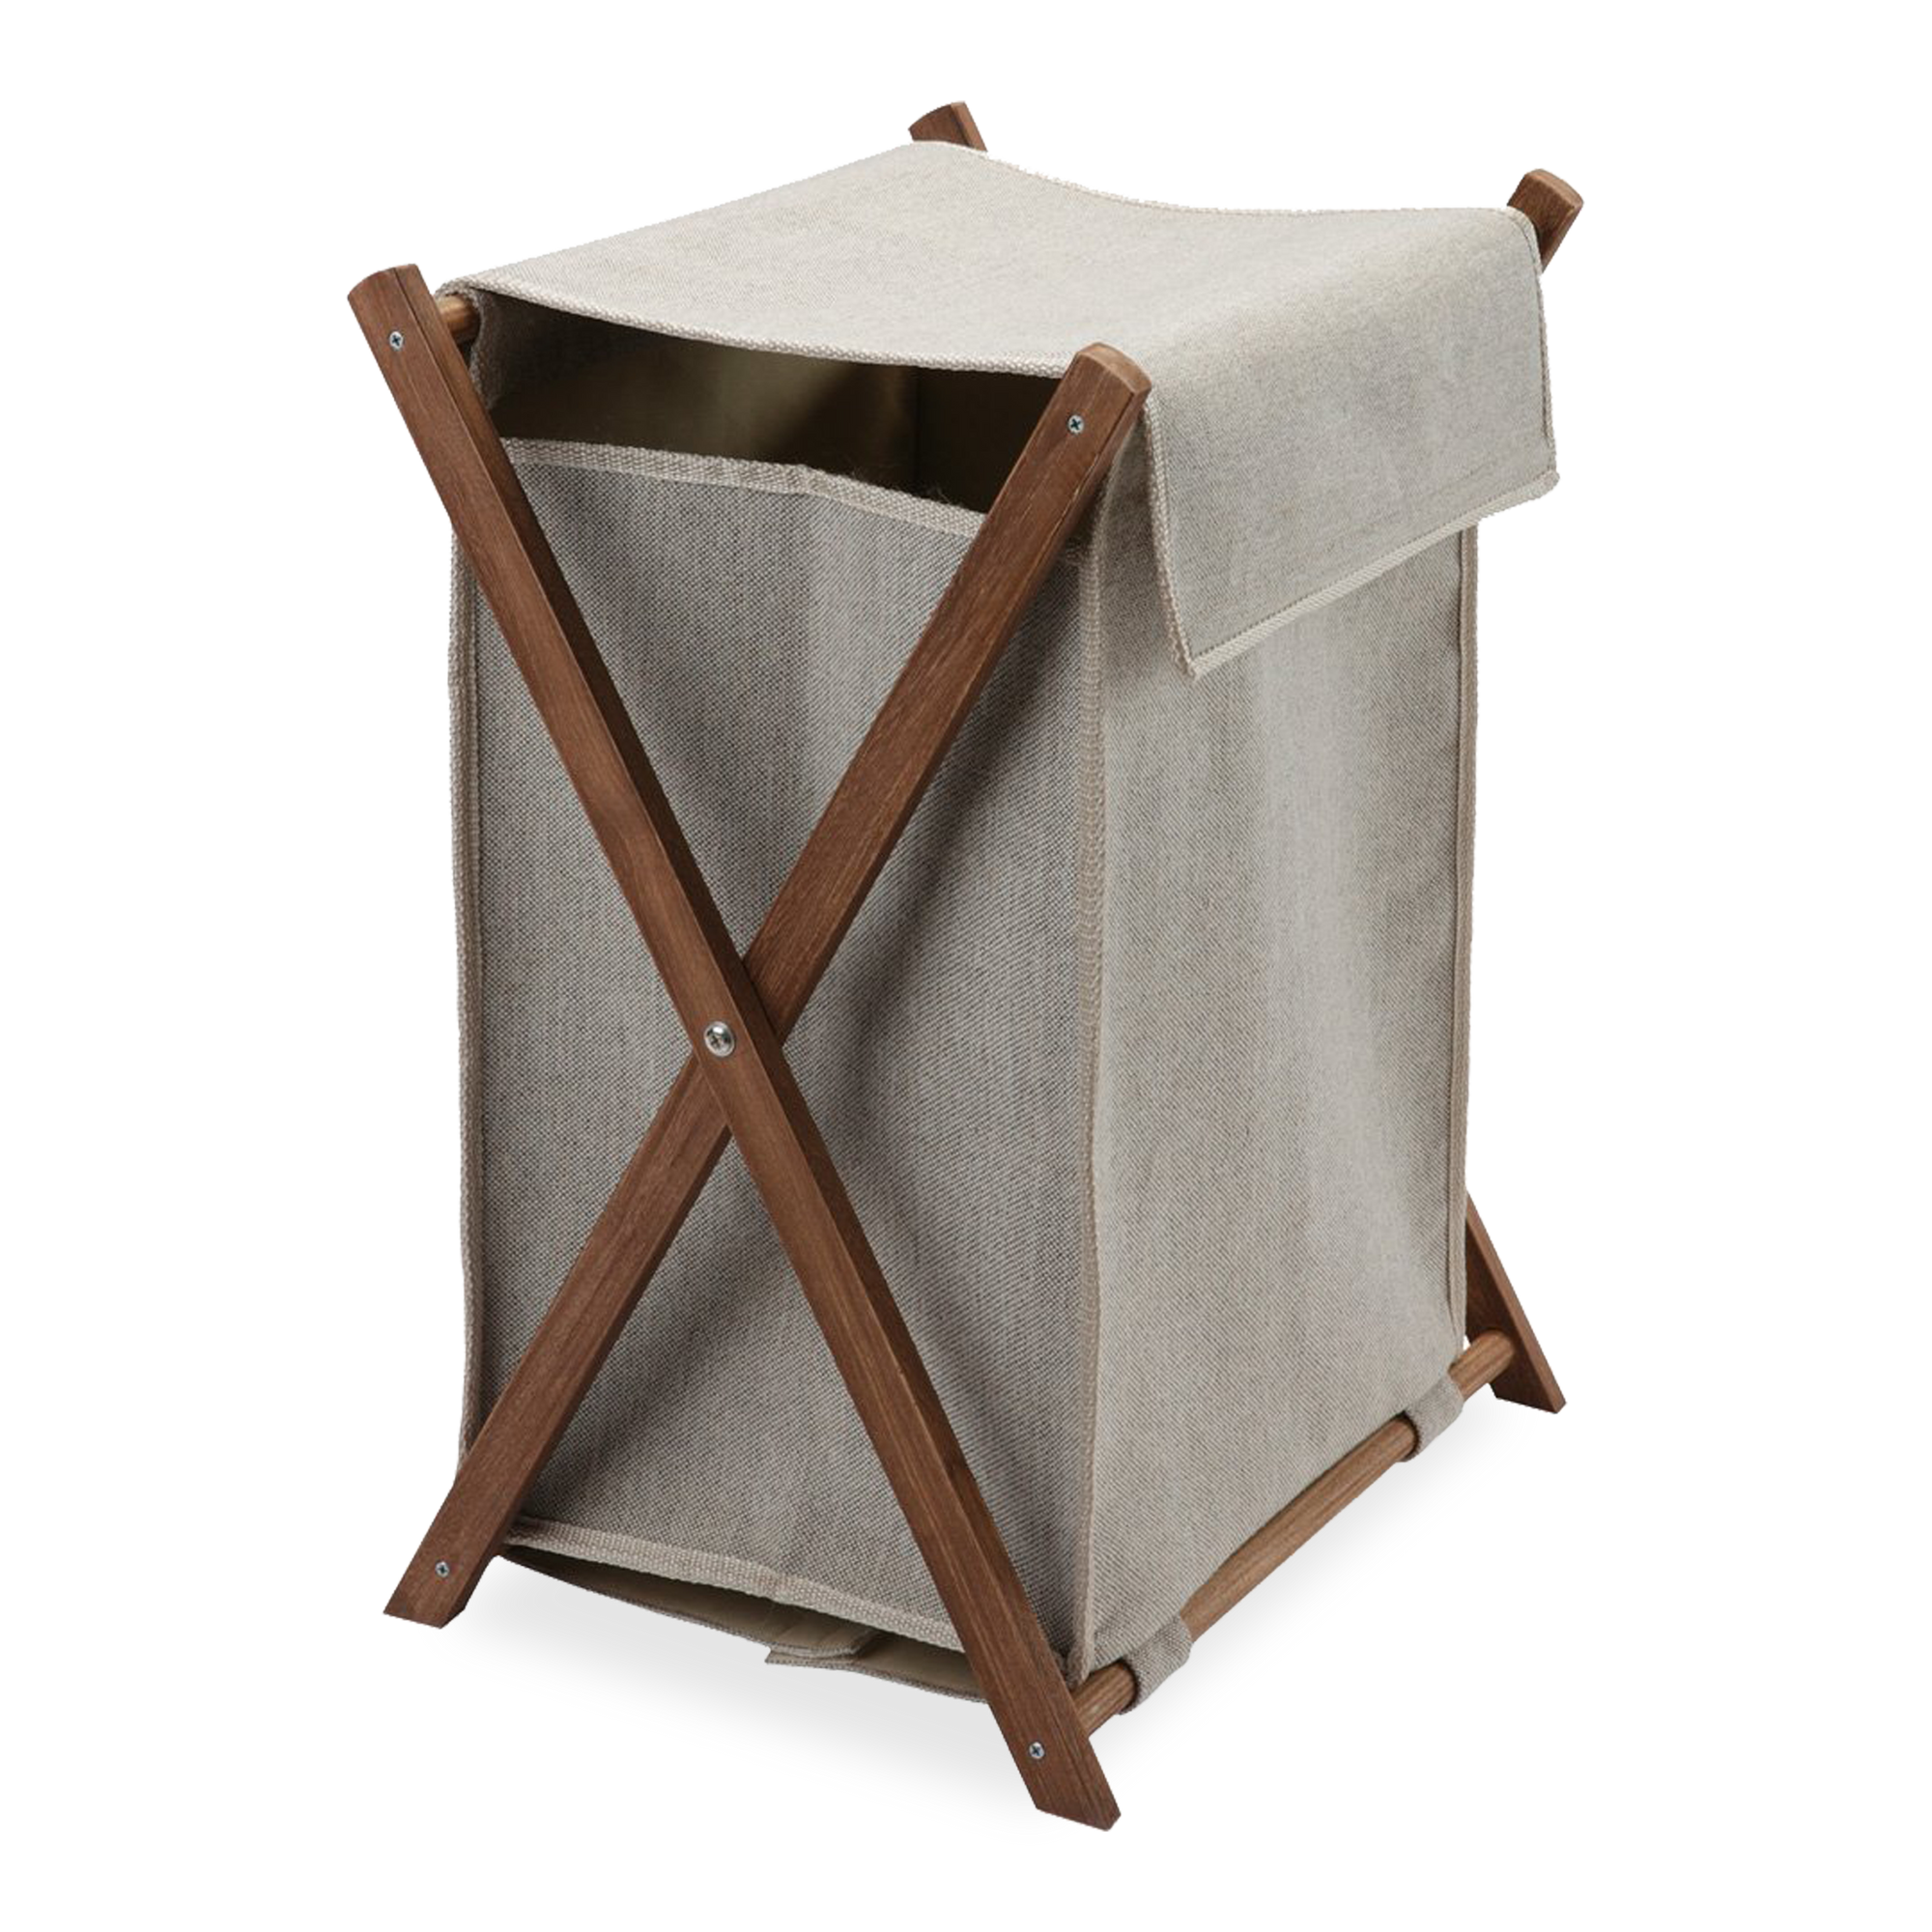 This versatile Frame Laundry Basket consists of wooden frames that can be folded for easy storage.